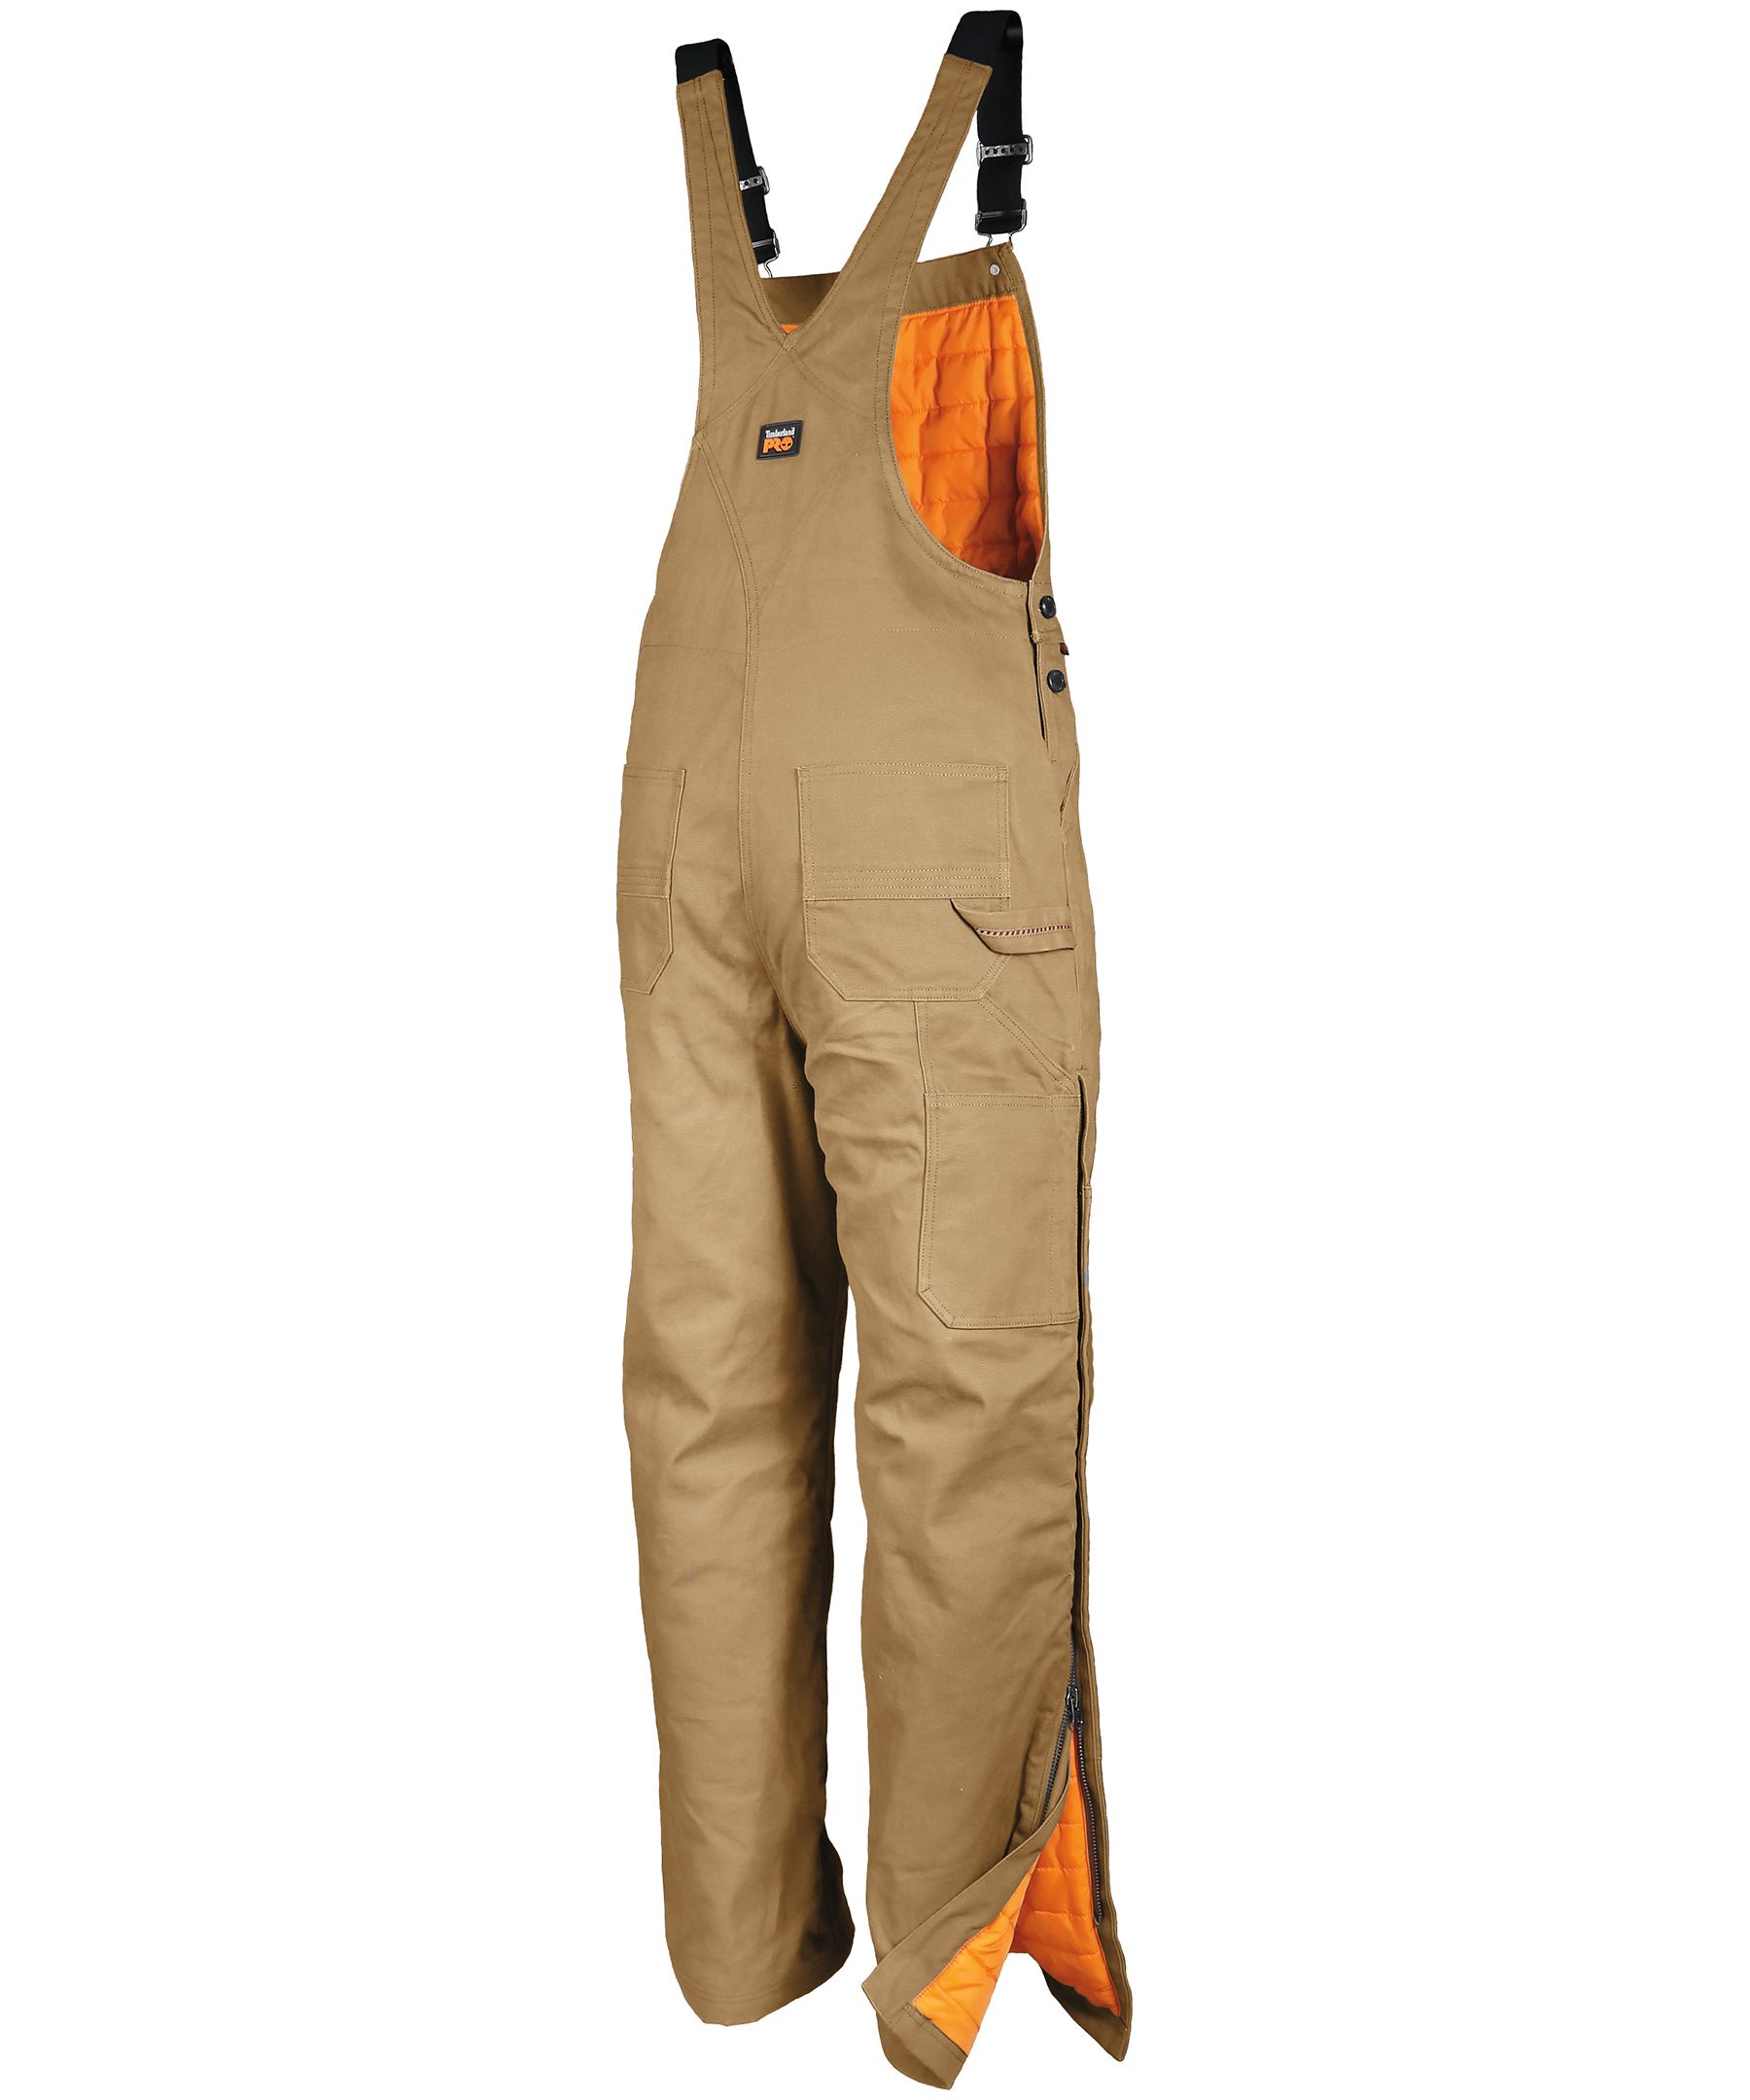 https://media-www.marks.com/product/marks-work-wearhouse/industrial-world/workwear/410034705534/timberland-pro-men-s-gritman-original-fit-insulated-bib-overalls-634d9b9e-1574-4486-af86-d2d4d94cfe42-jpgrendition.jpg?imdensity=1&imwidth=1244&impolicy=mZoom